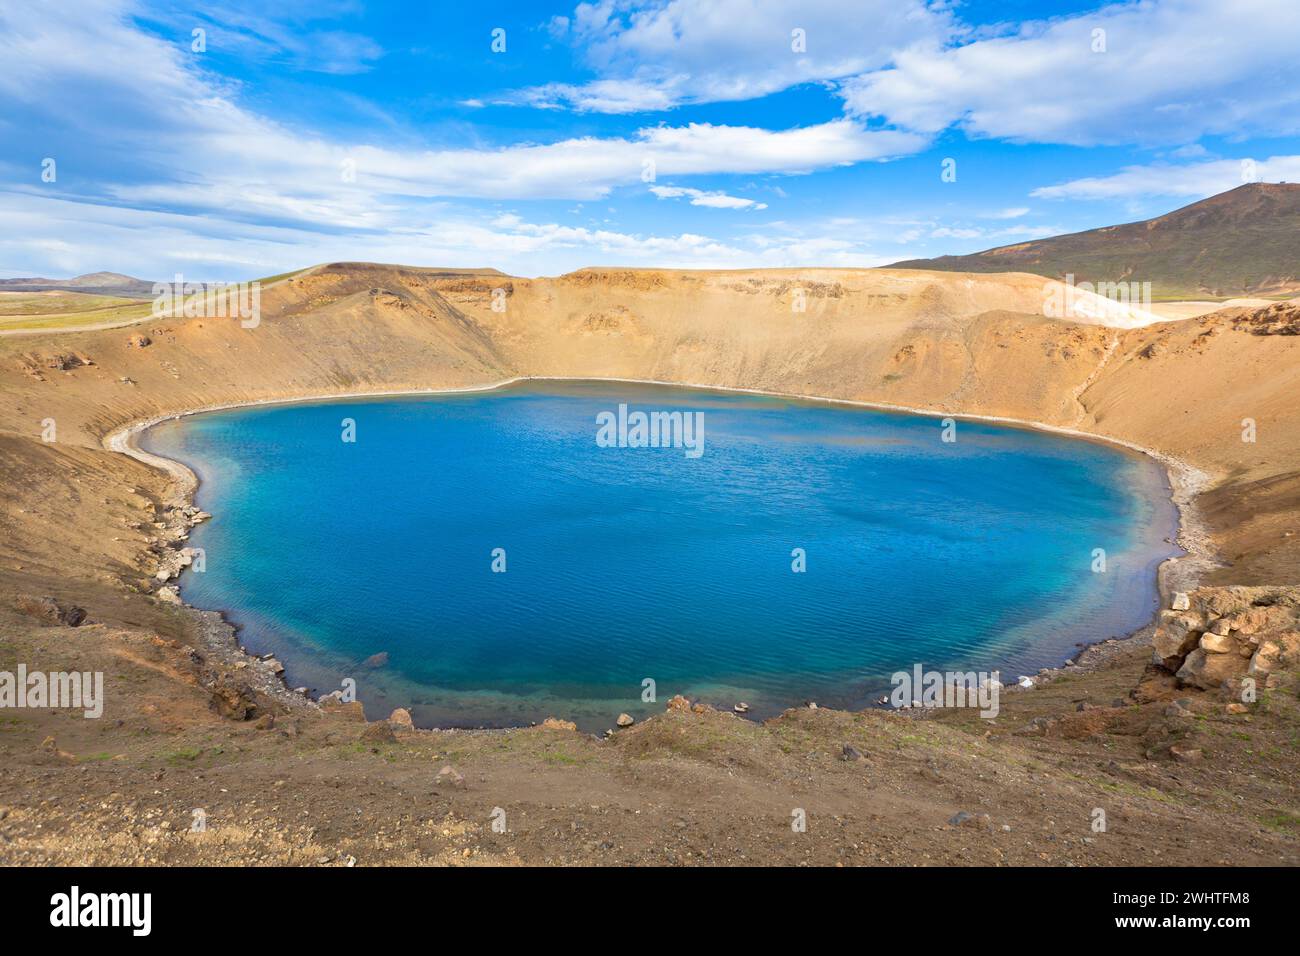 Crater of an extinct volcano Krafla in Iceland filled with water Stock Photo